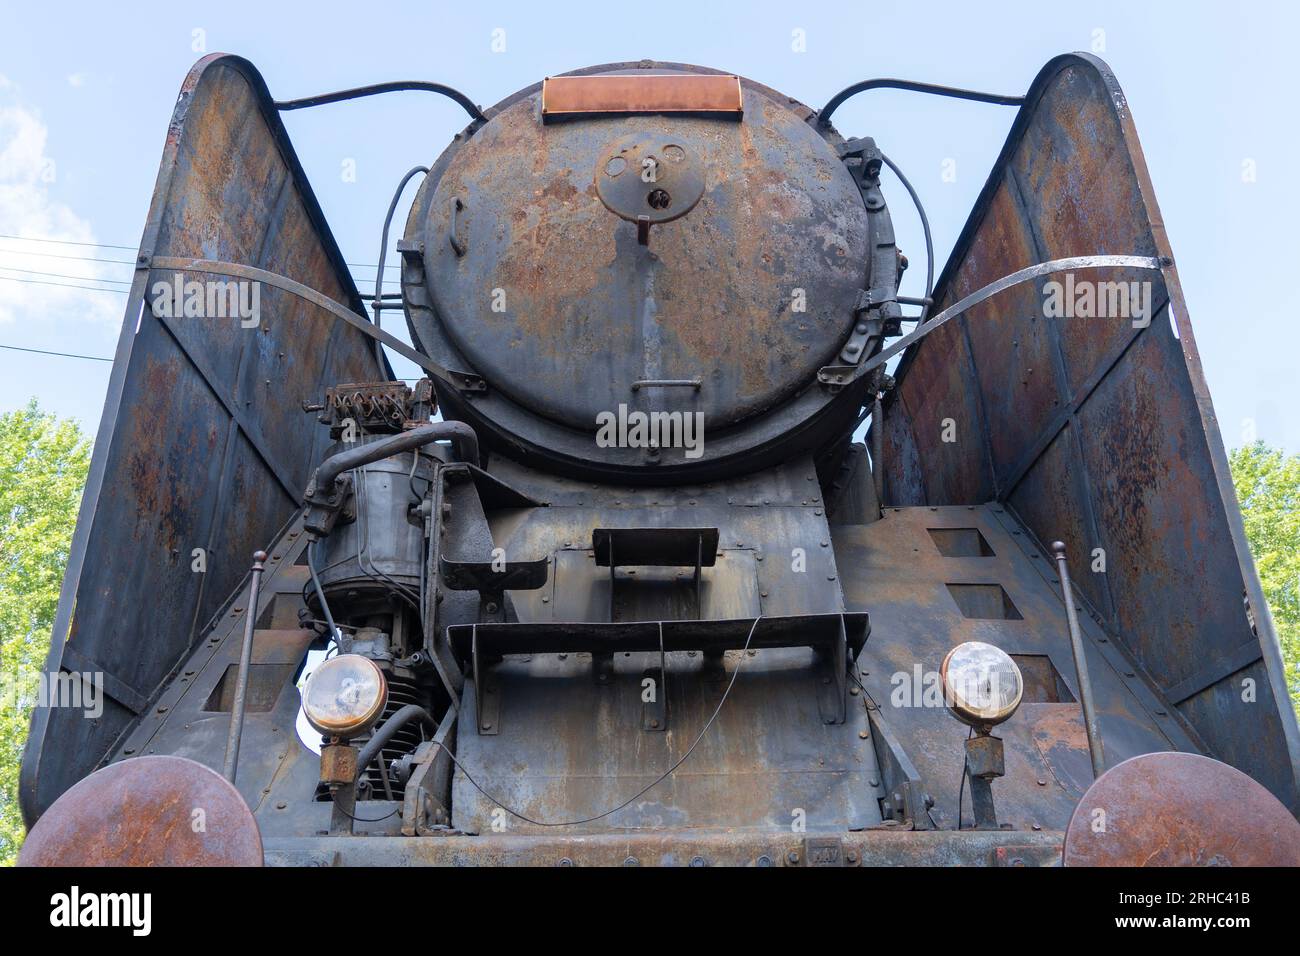 The front of an old black rusty steam locomotive from below Stock Photo